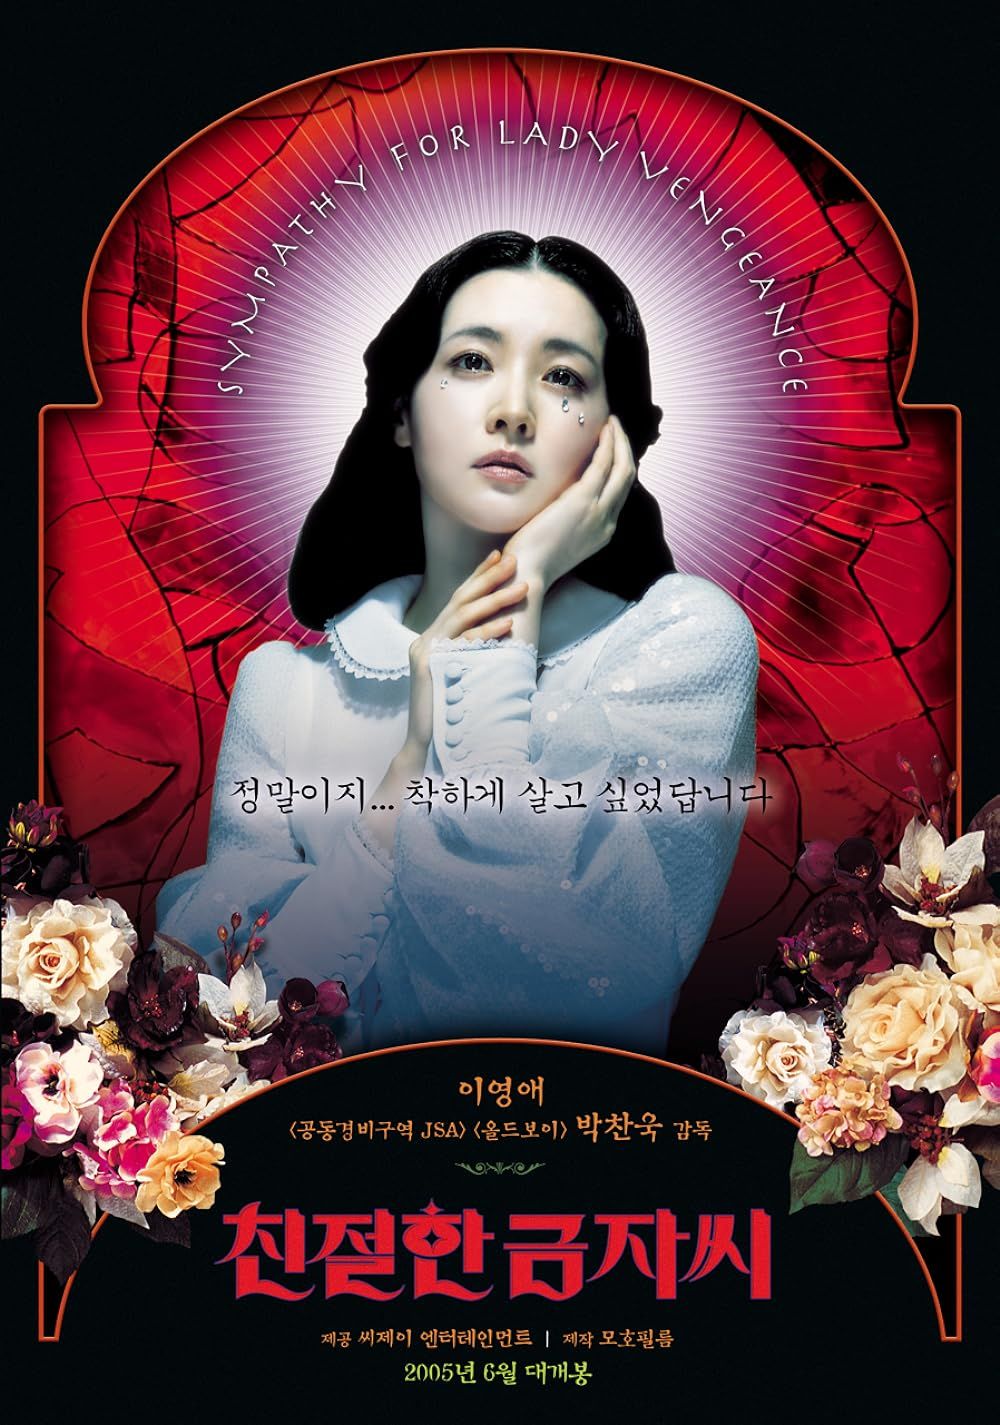 Lee Yeong-ae cries while surrounded by flowers on the Lady Vengeance Poster